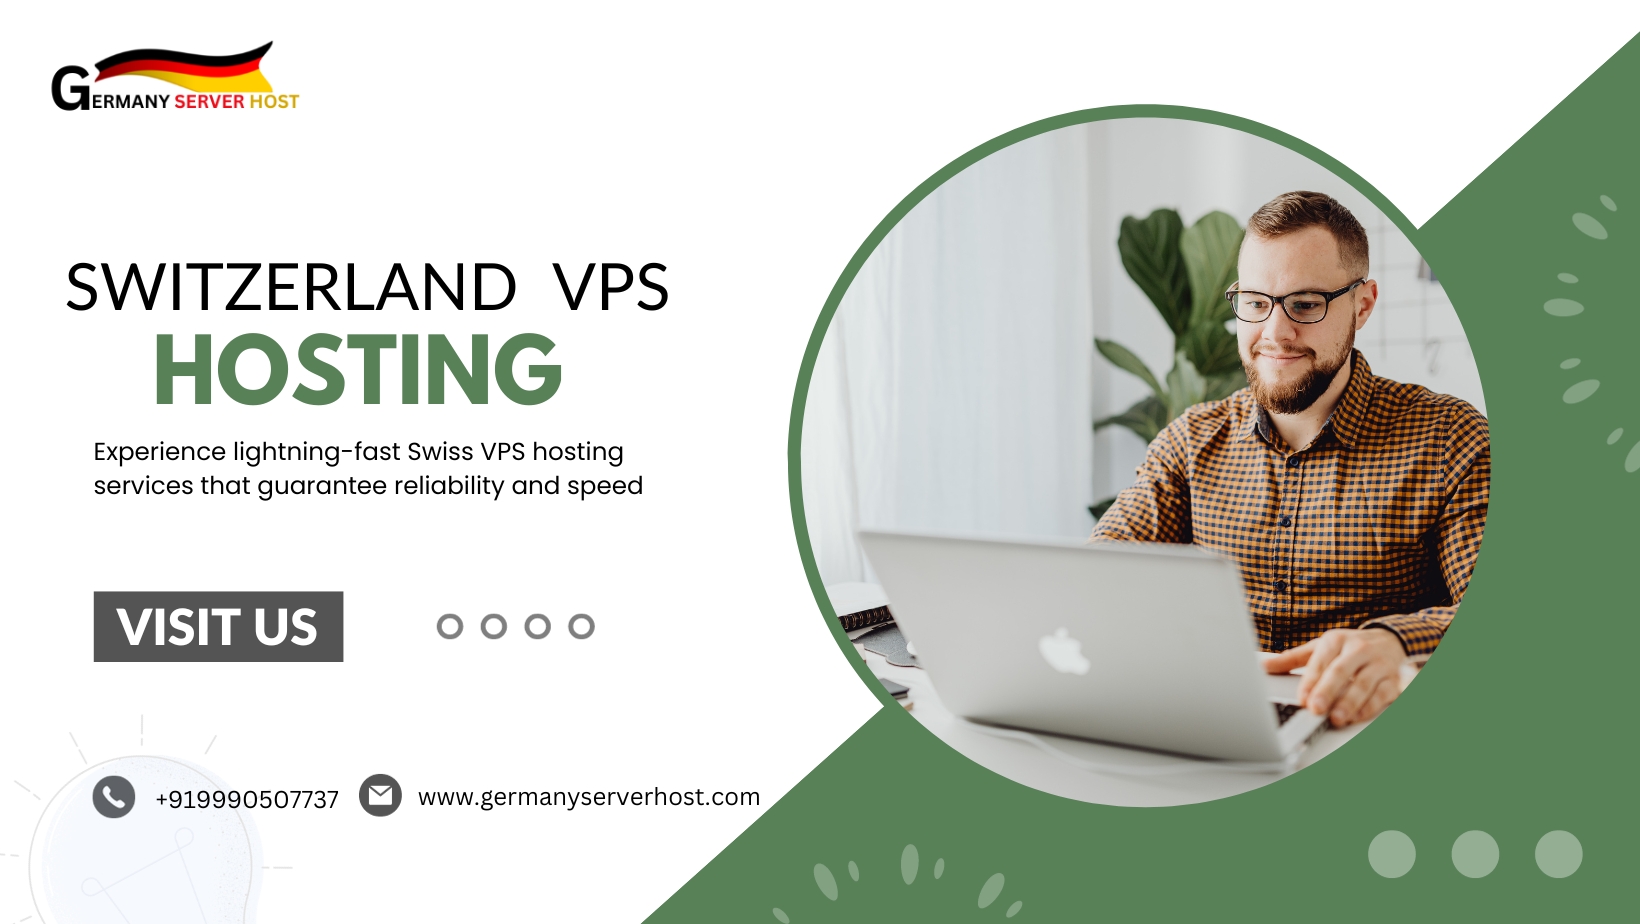 Swiss Perfection: Experience Top-notch VPS Hosting in Switzerland